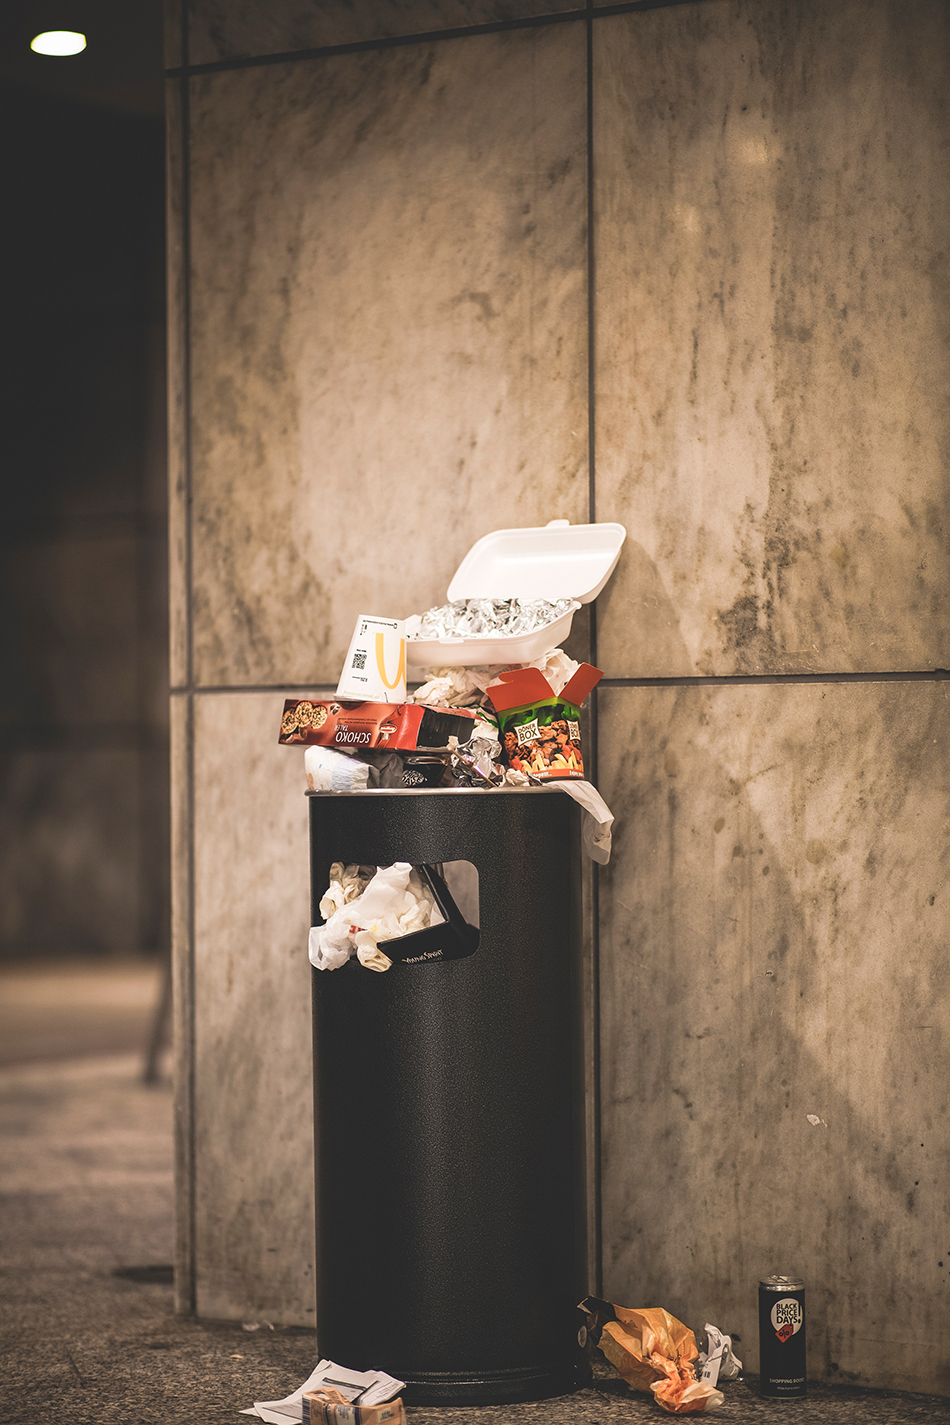 more trash bins Effective Office Cleaning Tips and Tricks